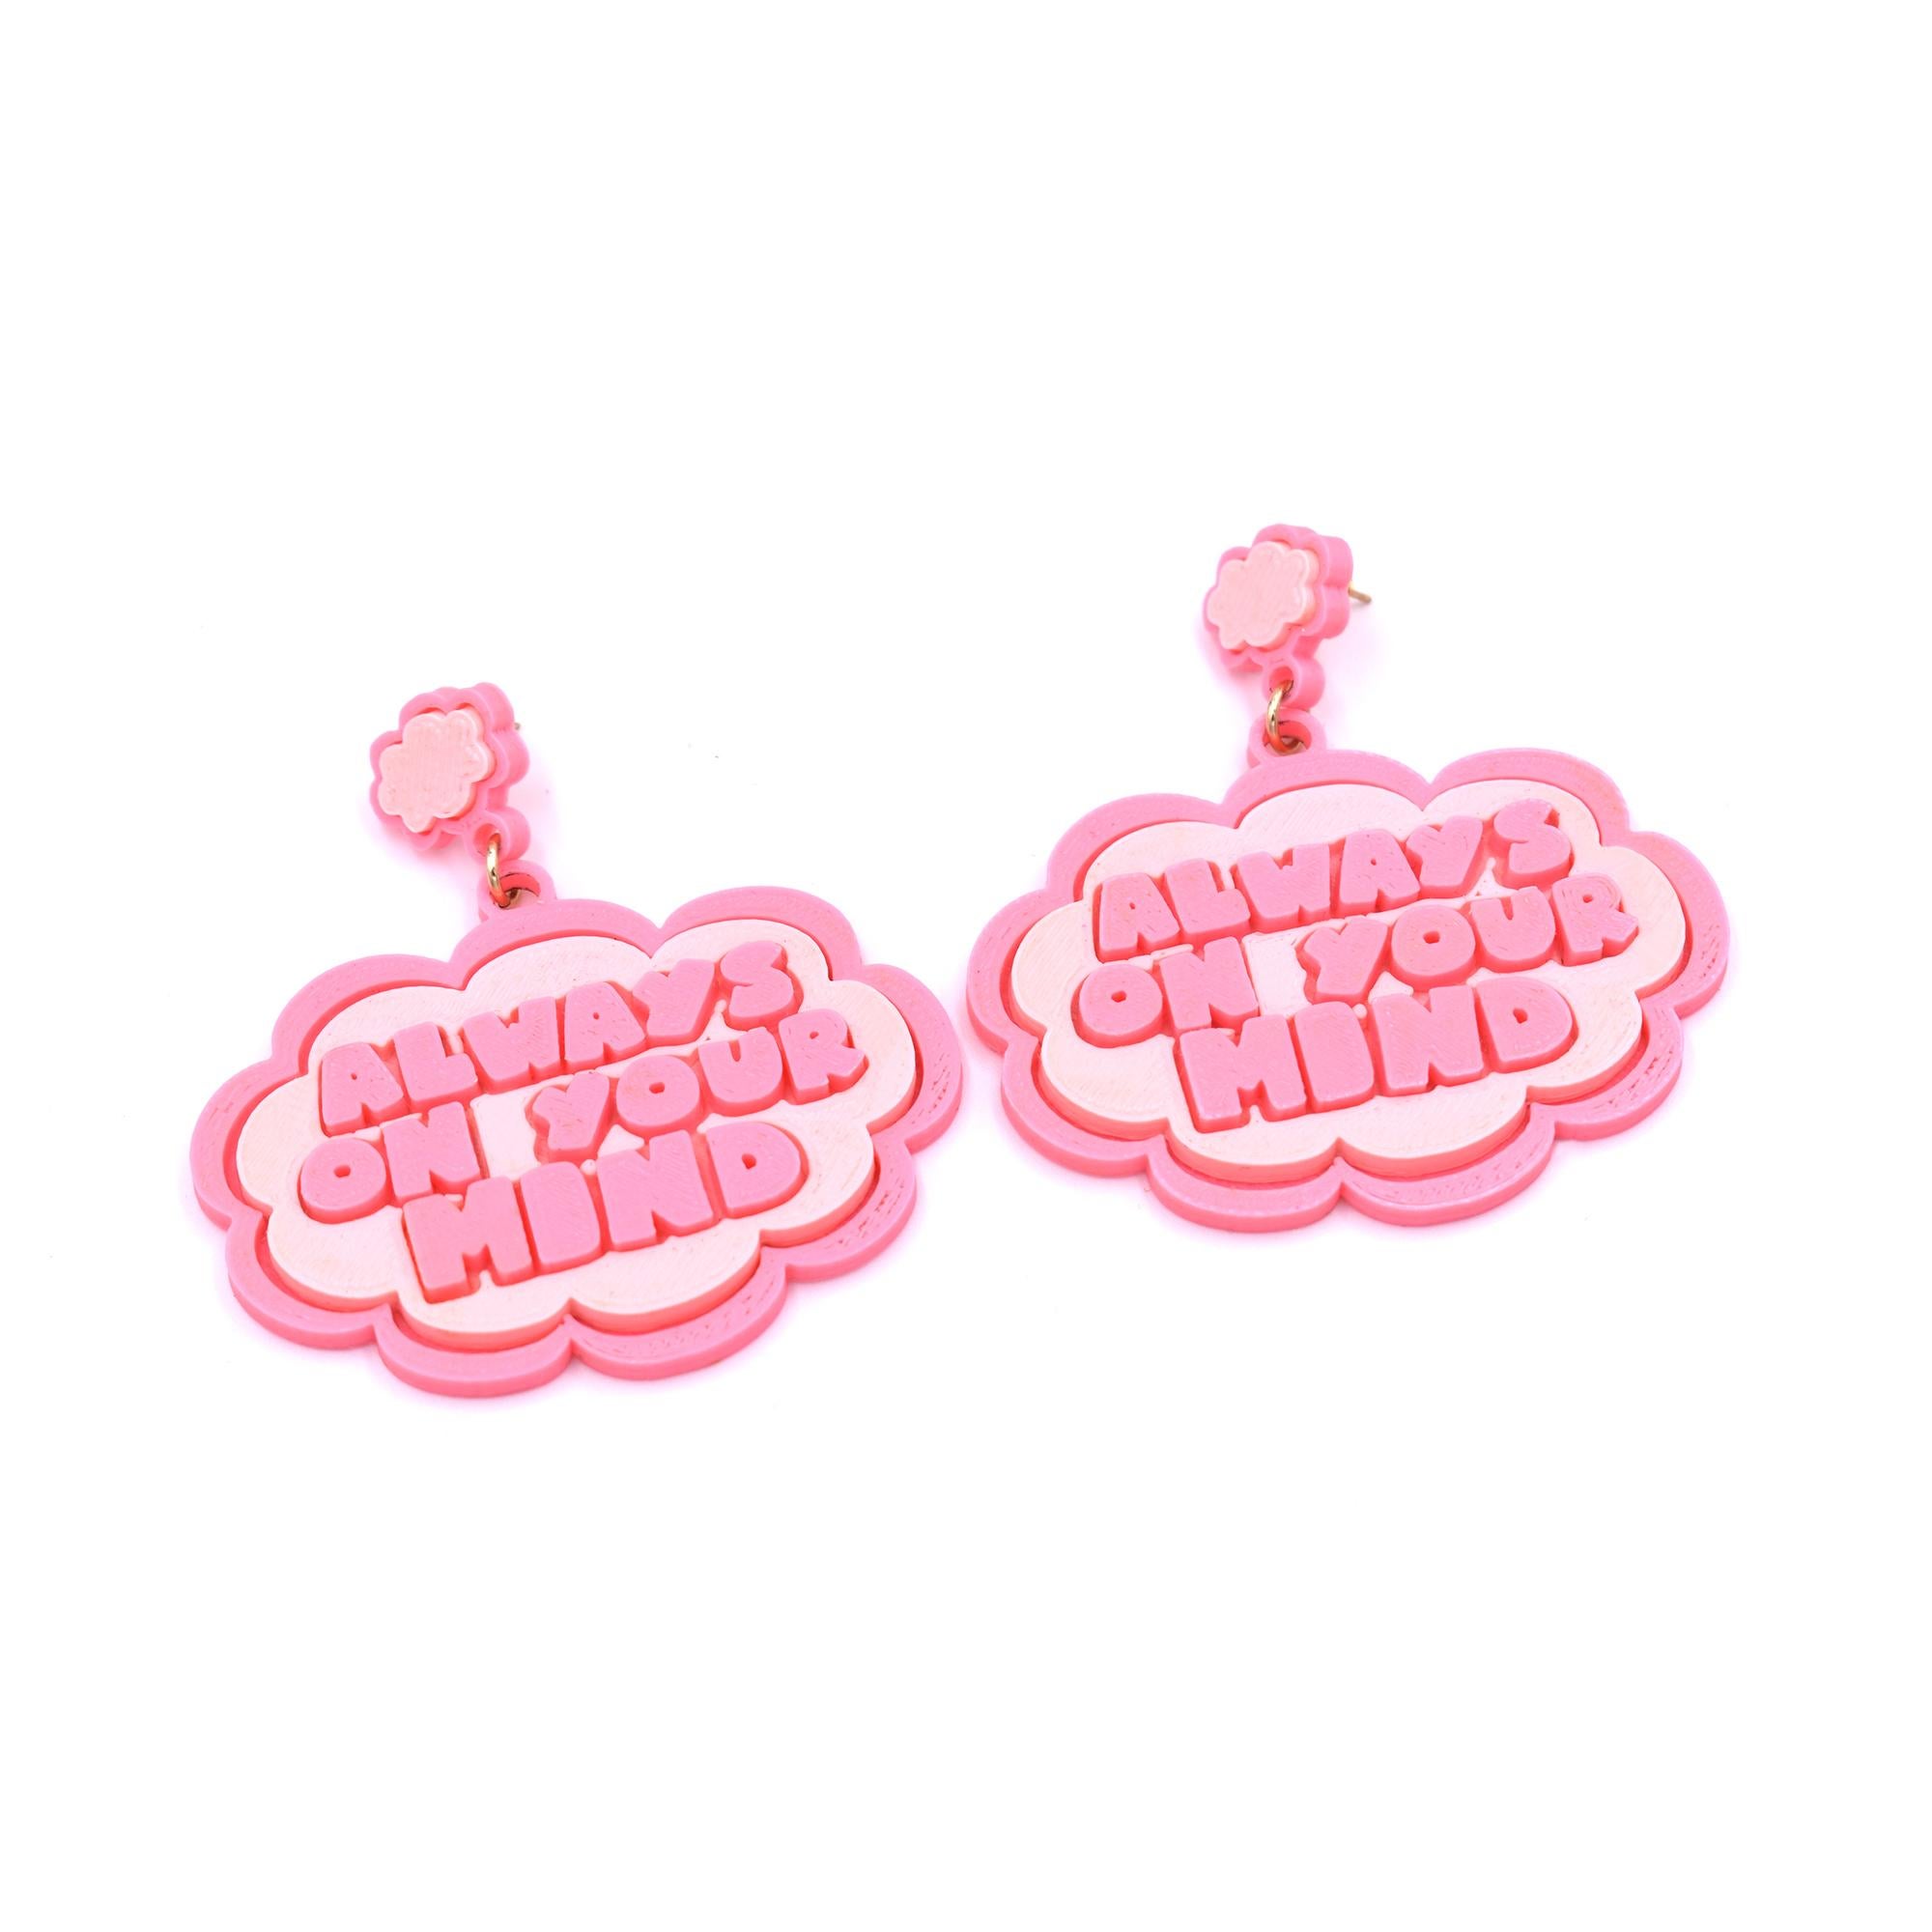 Contemporary 3d Printed I KNOW Speech Bubble Earrings Pink For Sale